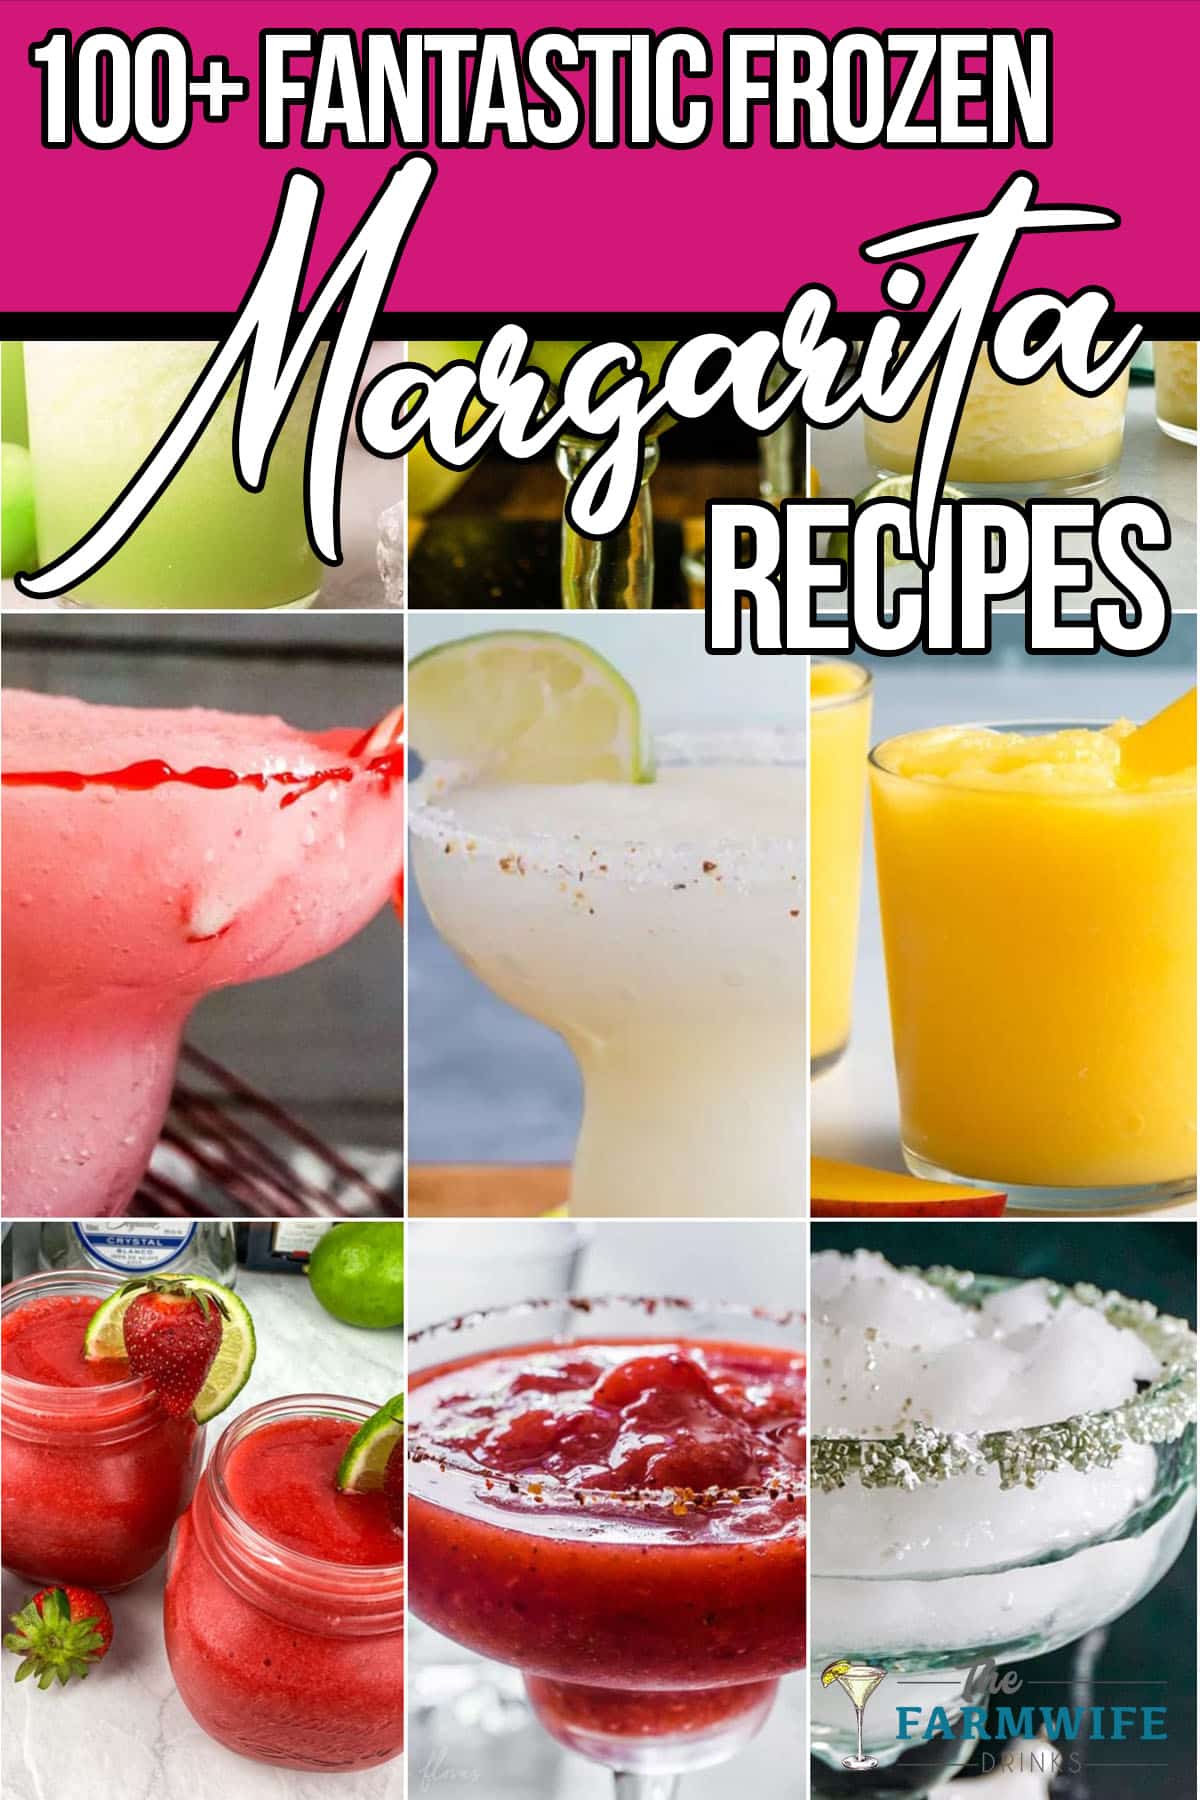 photo collage of frozen margarita ideas with text which reads 100+ fantastic frozen margarita recipes